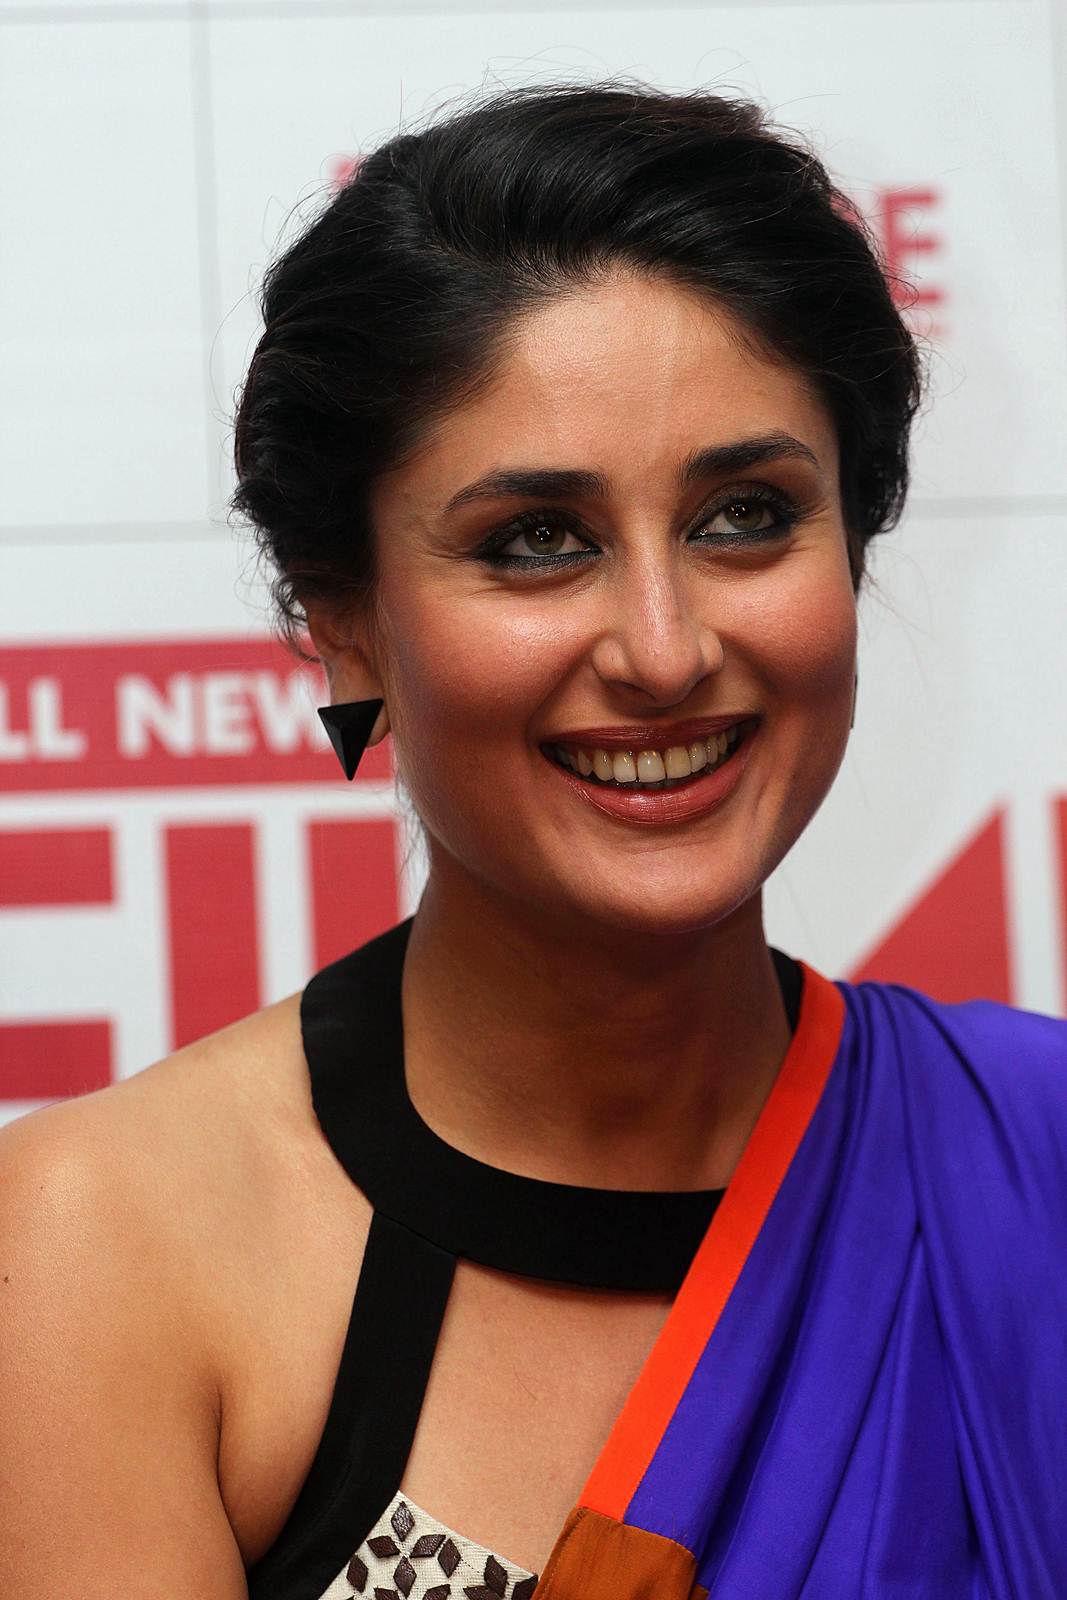 Kareena launch Filmfare magazine September 2013 cover page Photos | Picture 568382